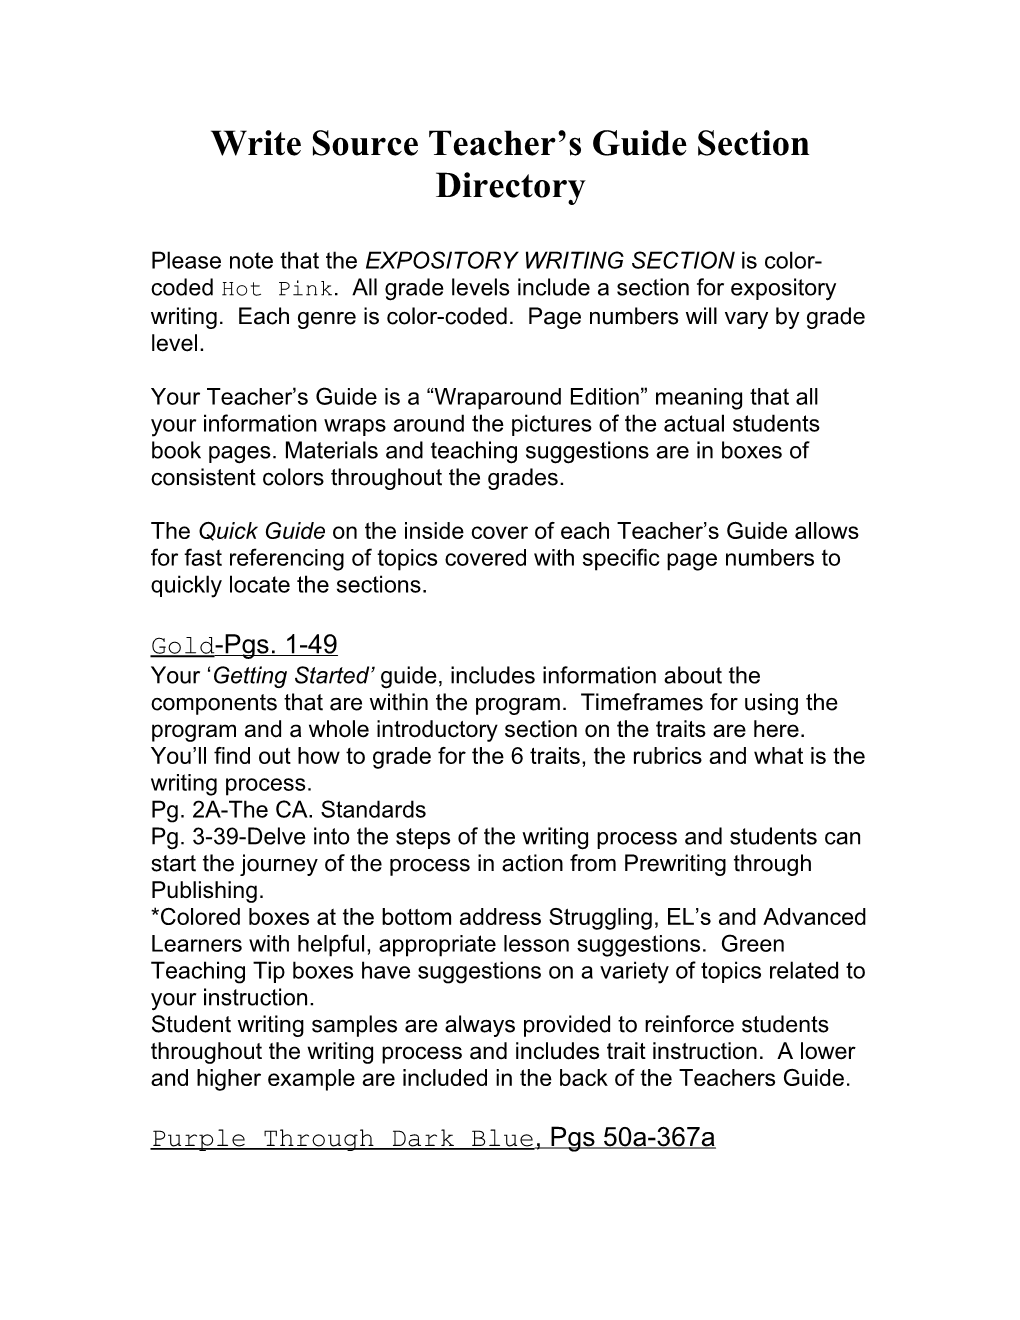 Write Source Teachers Guide Section Directory